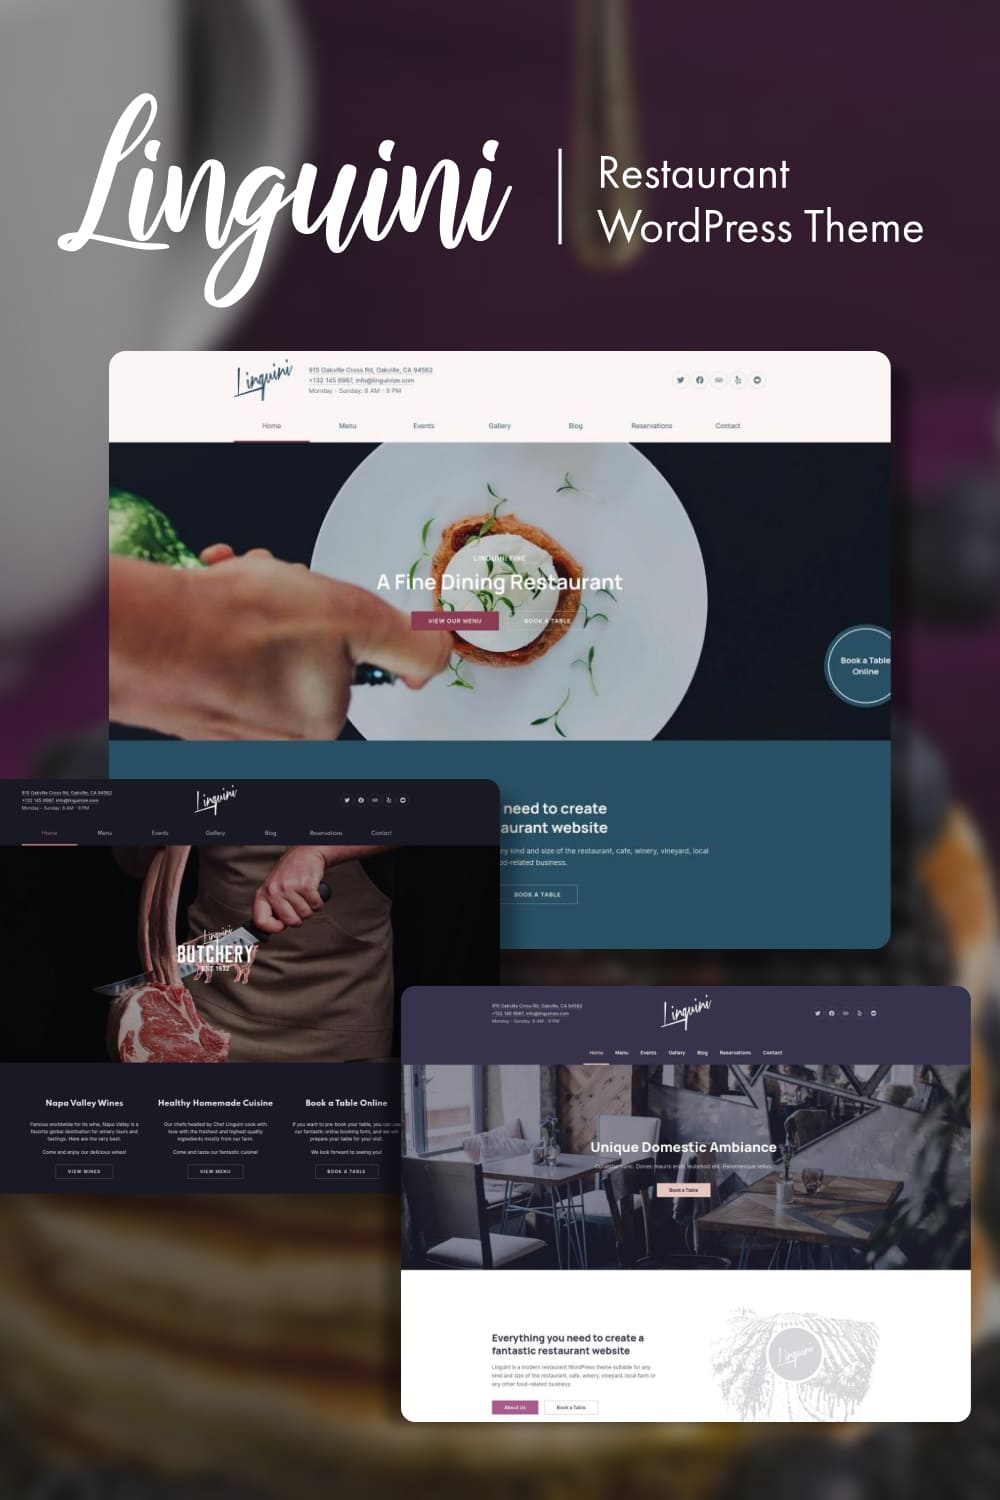 A set of exquisite restaurant WordPress theme pages.